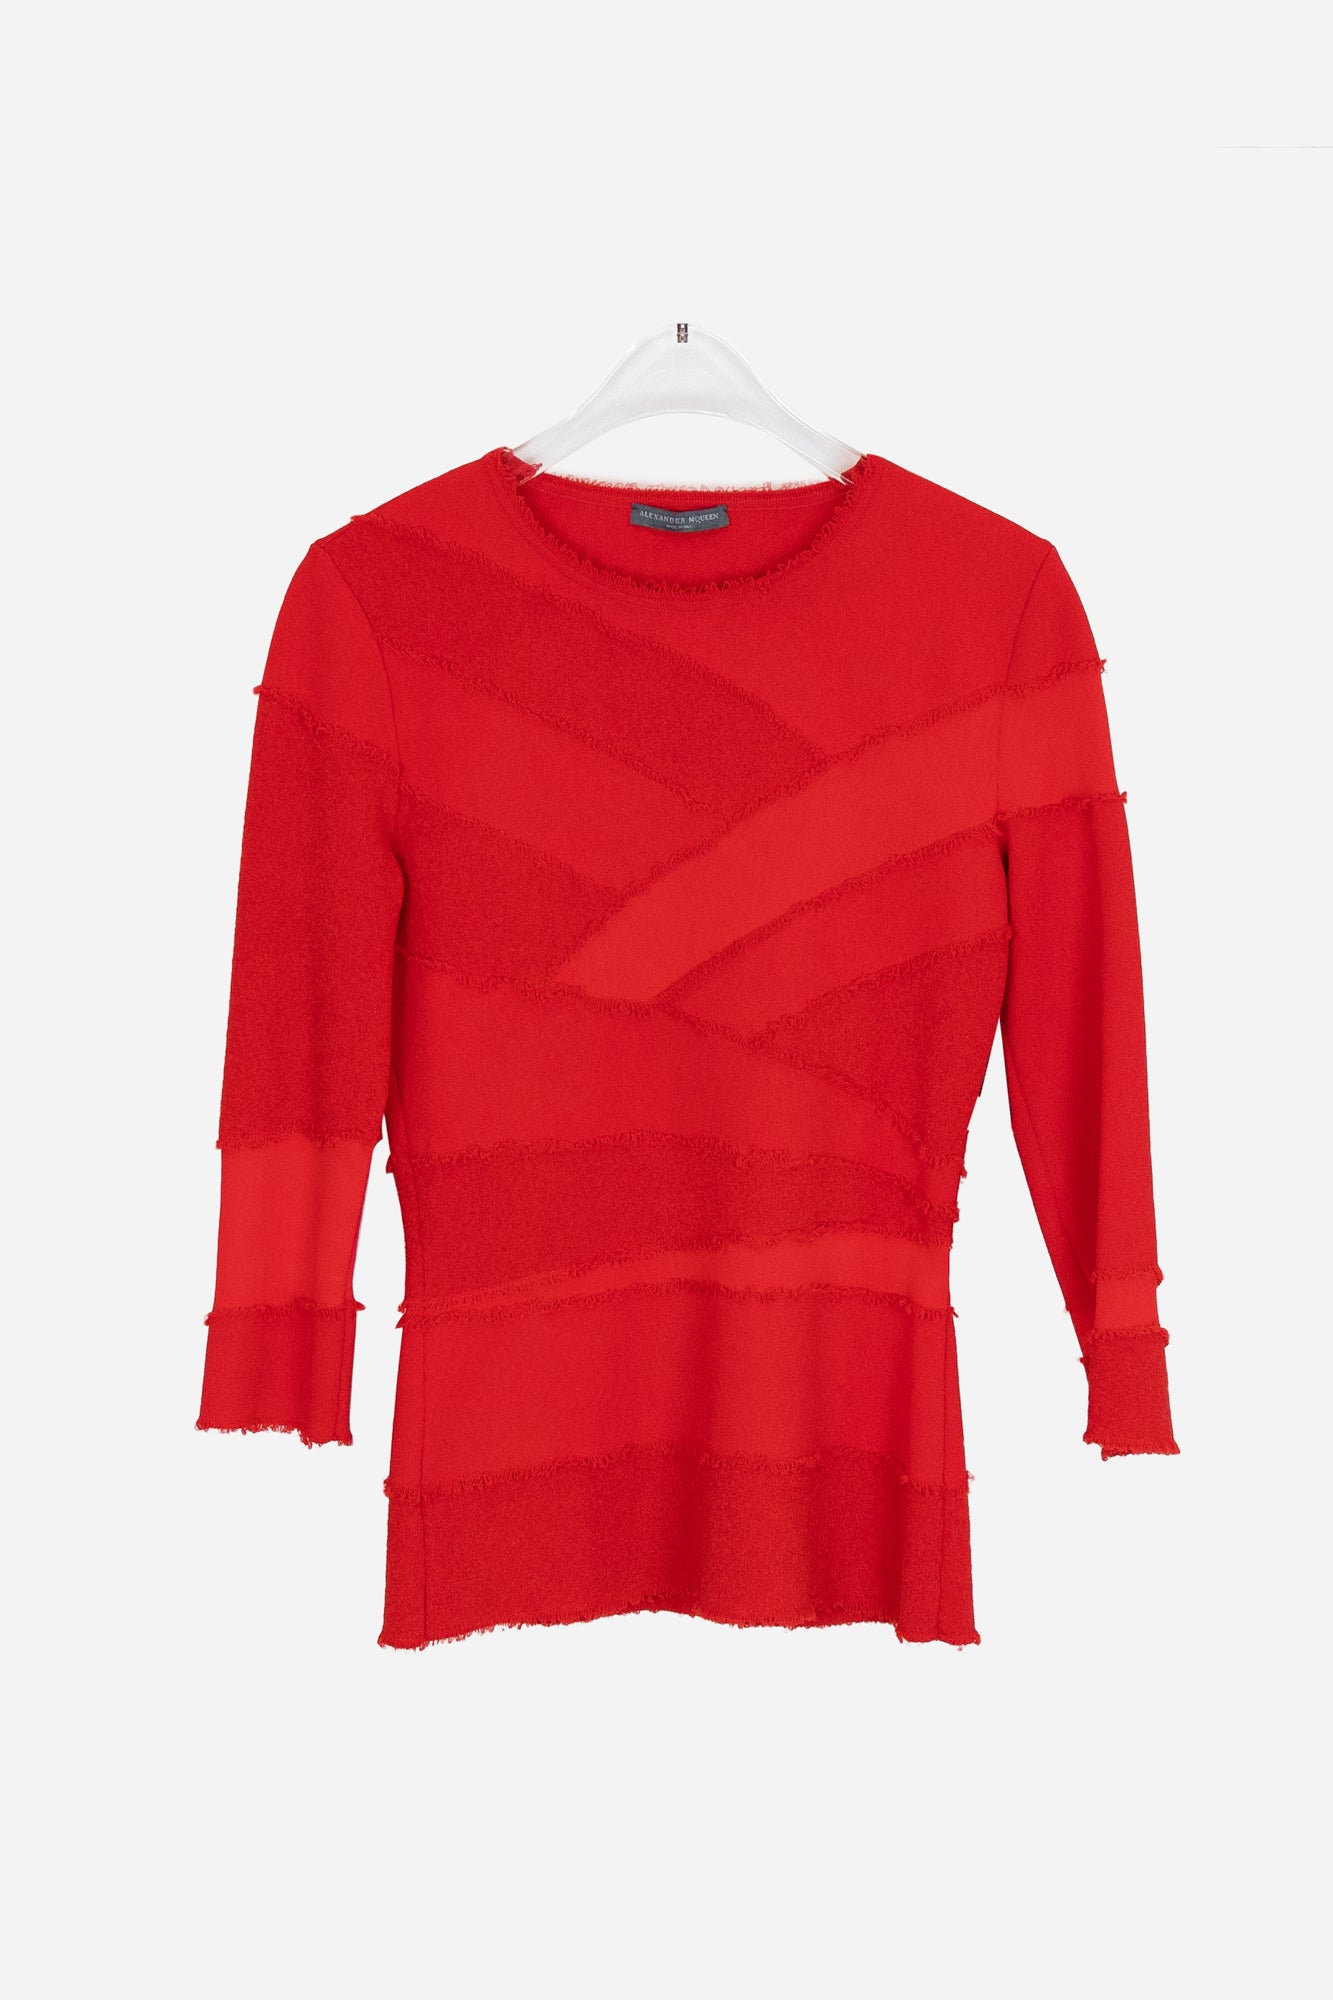 Red Crew Neck Knit Distressed Top